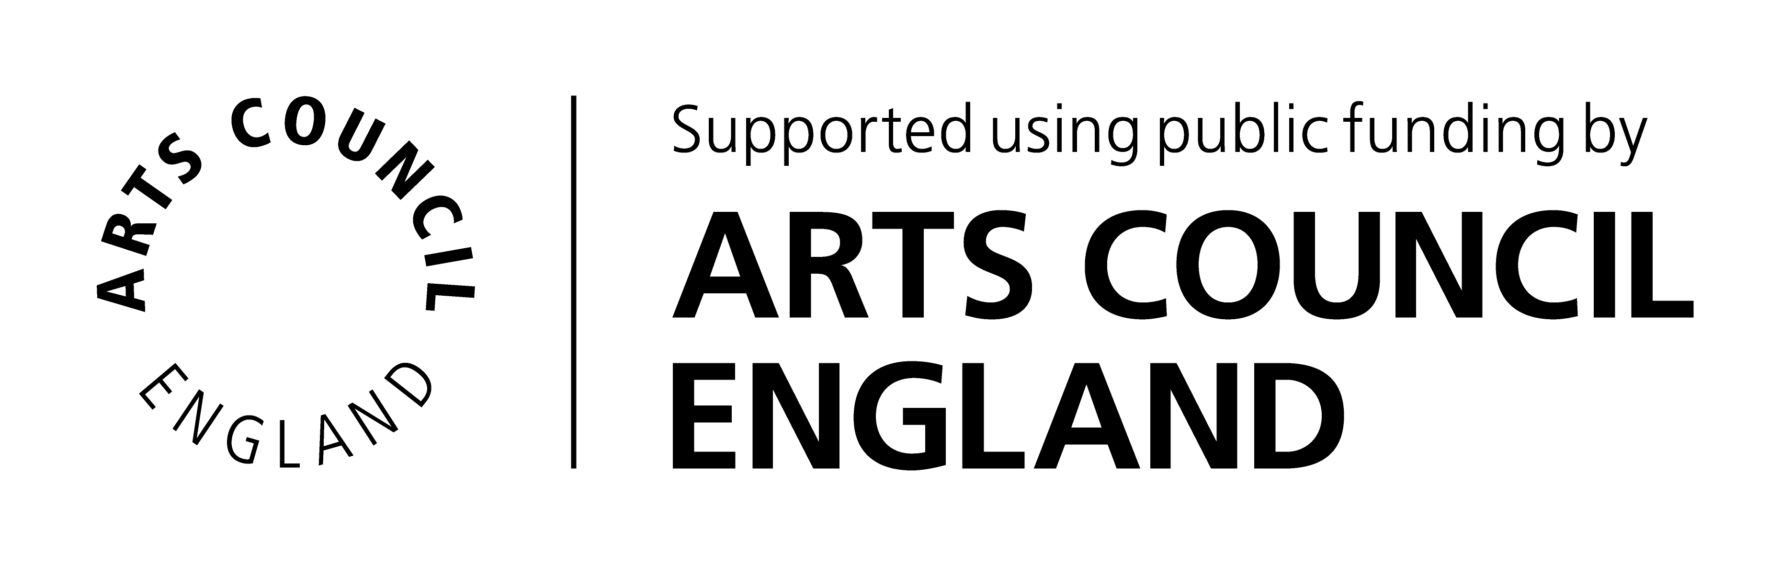 Developing my creative practice – funding from Arts Council England